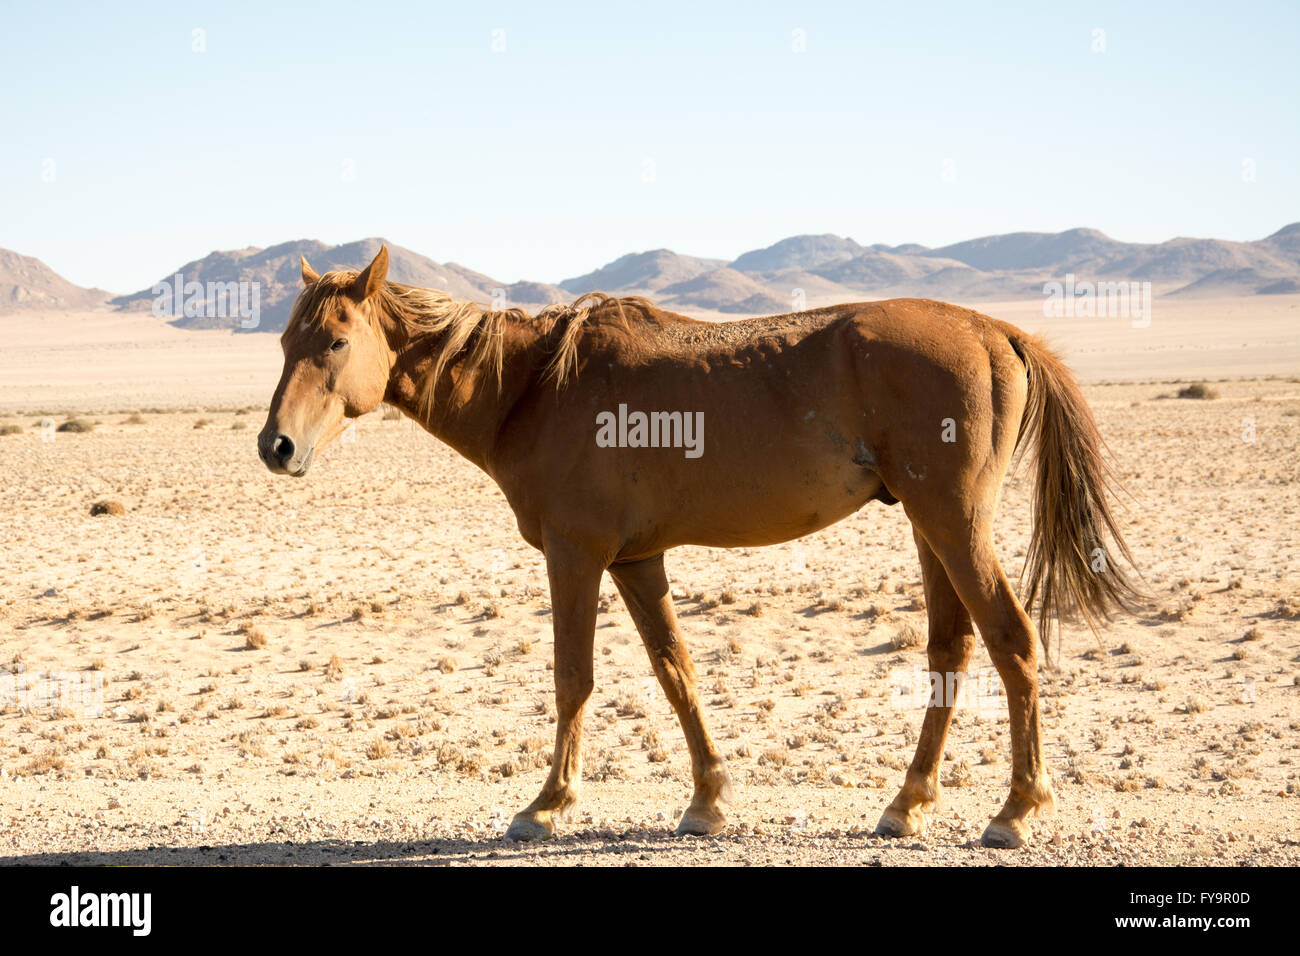 Namib Desert horse. Photo taken on the B4 national highway between Aus and Luderitz, Southern Namibia. Stock Photo